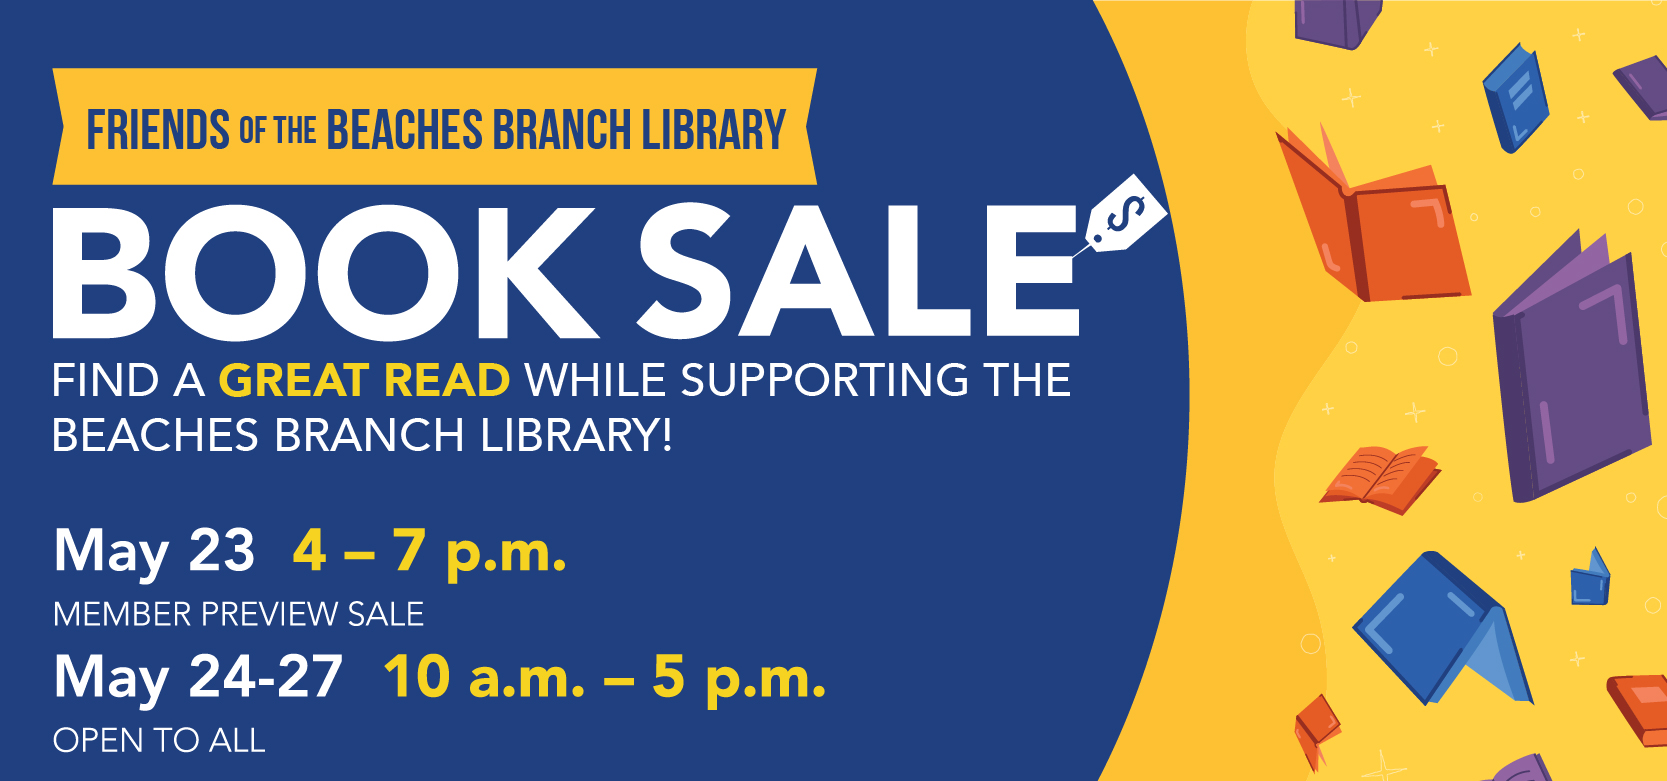 Shop The Friends Of The Beaches Branch Library Book Sale on May 23 from 4 pm to 7 pm and on May 24 to May 27 from 10 am to 5 pm.